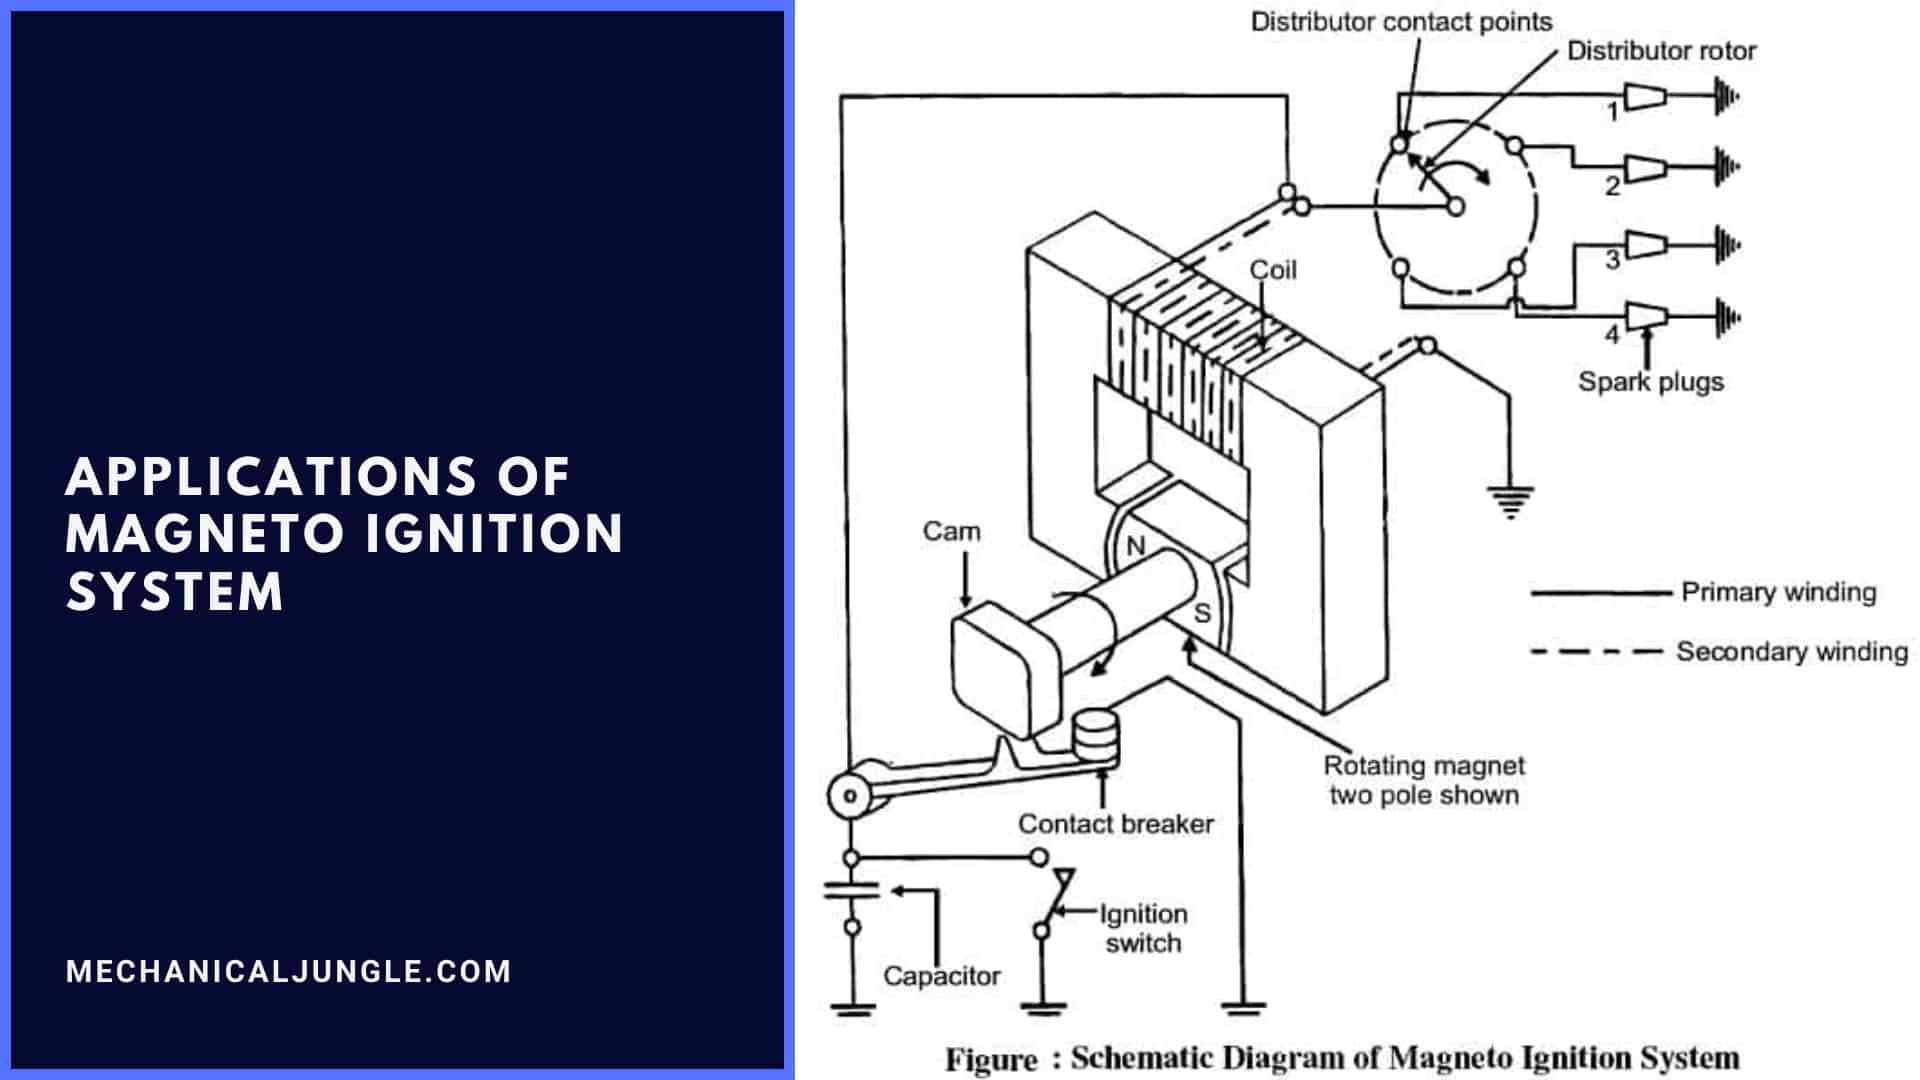 Applications of Magneto Ignition System